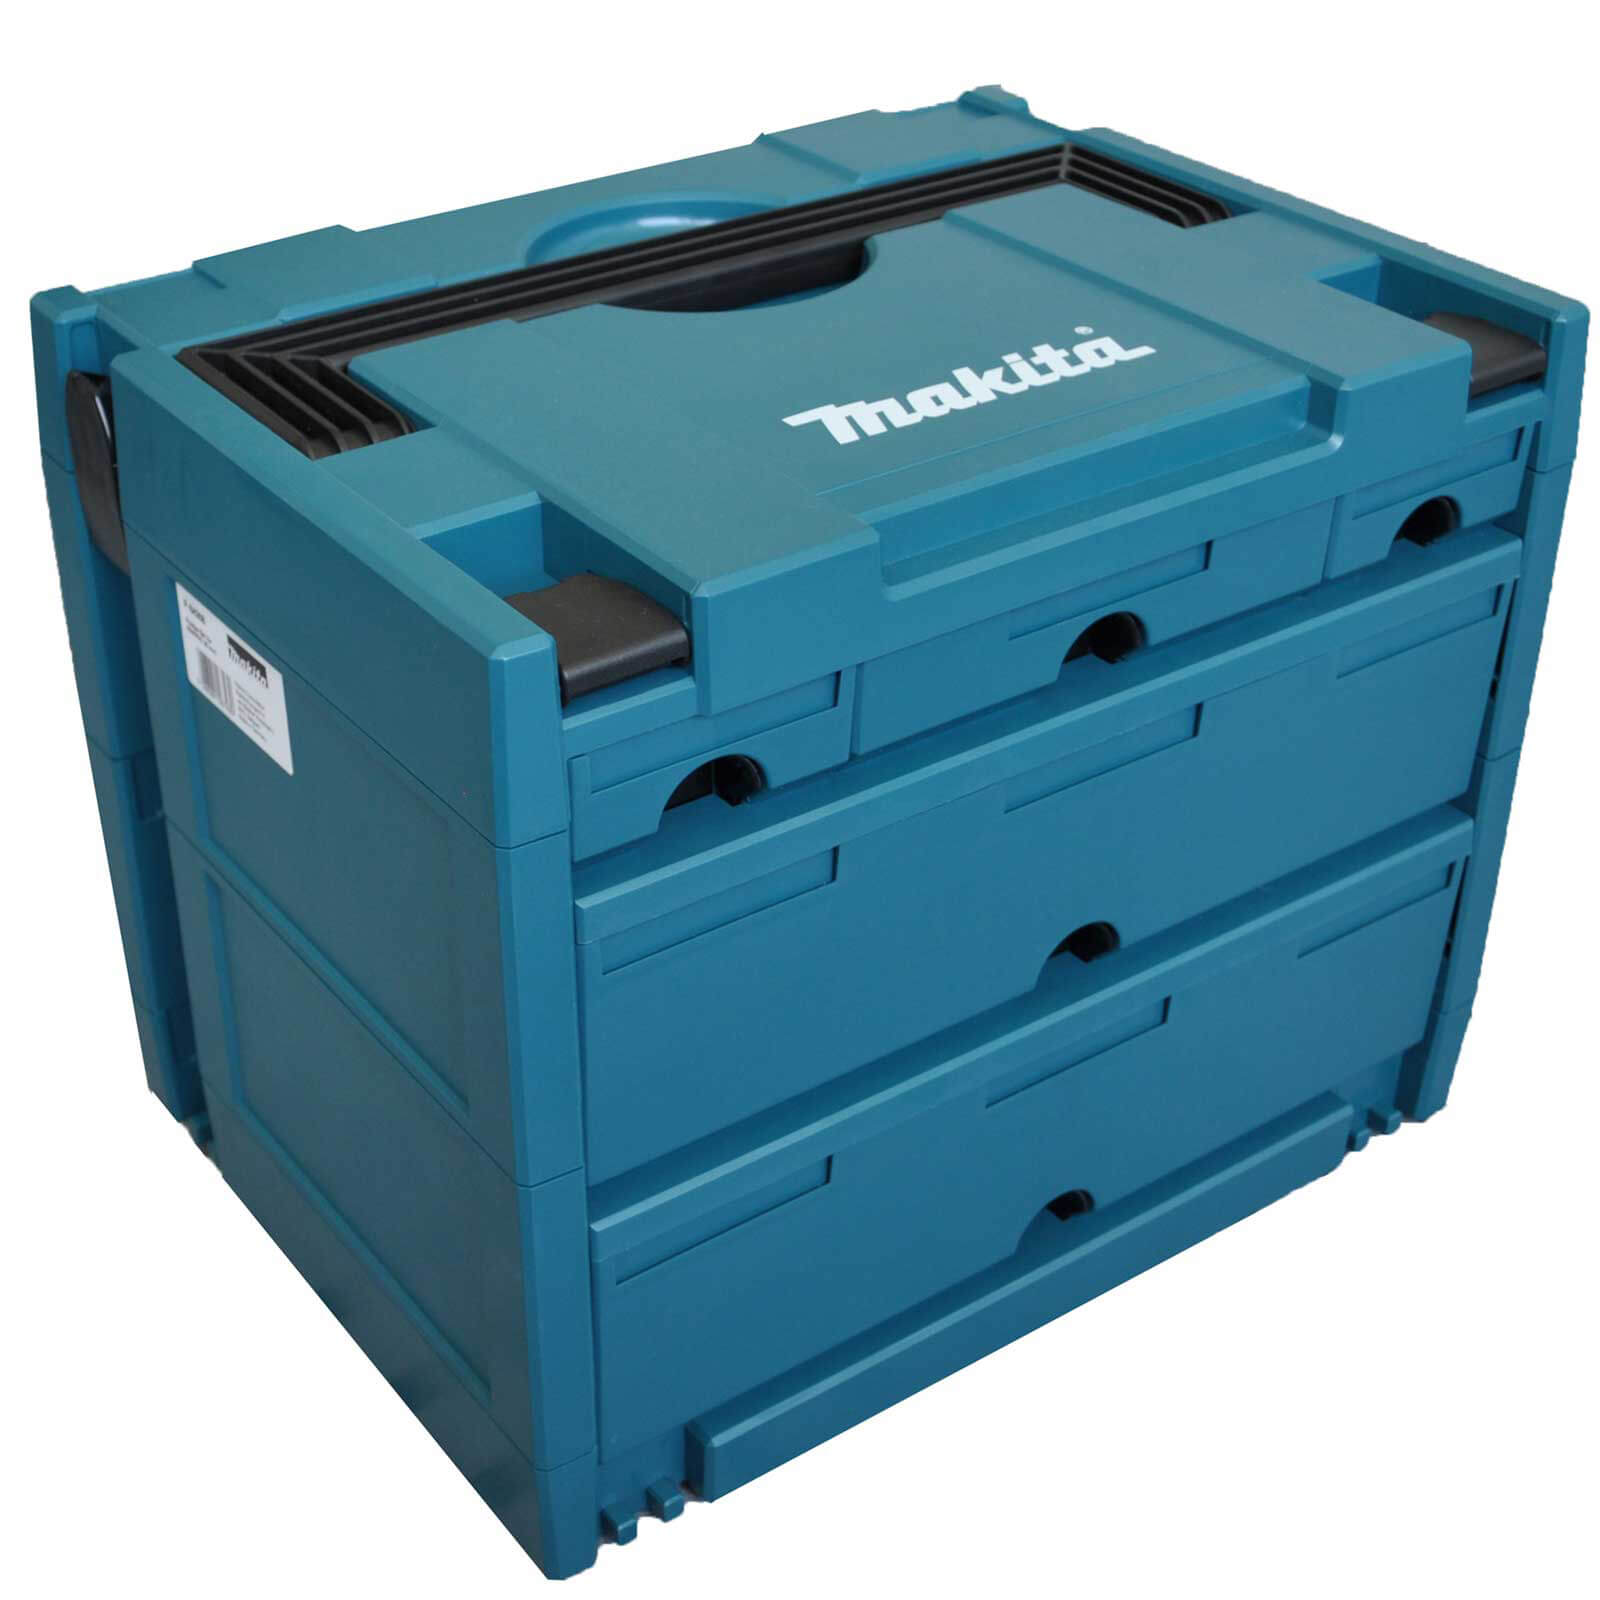 Stackable tool storage boxes